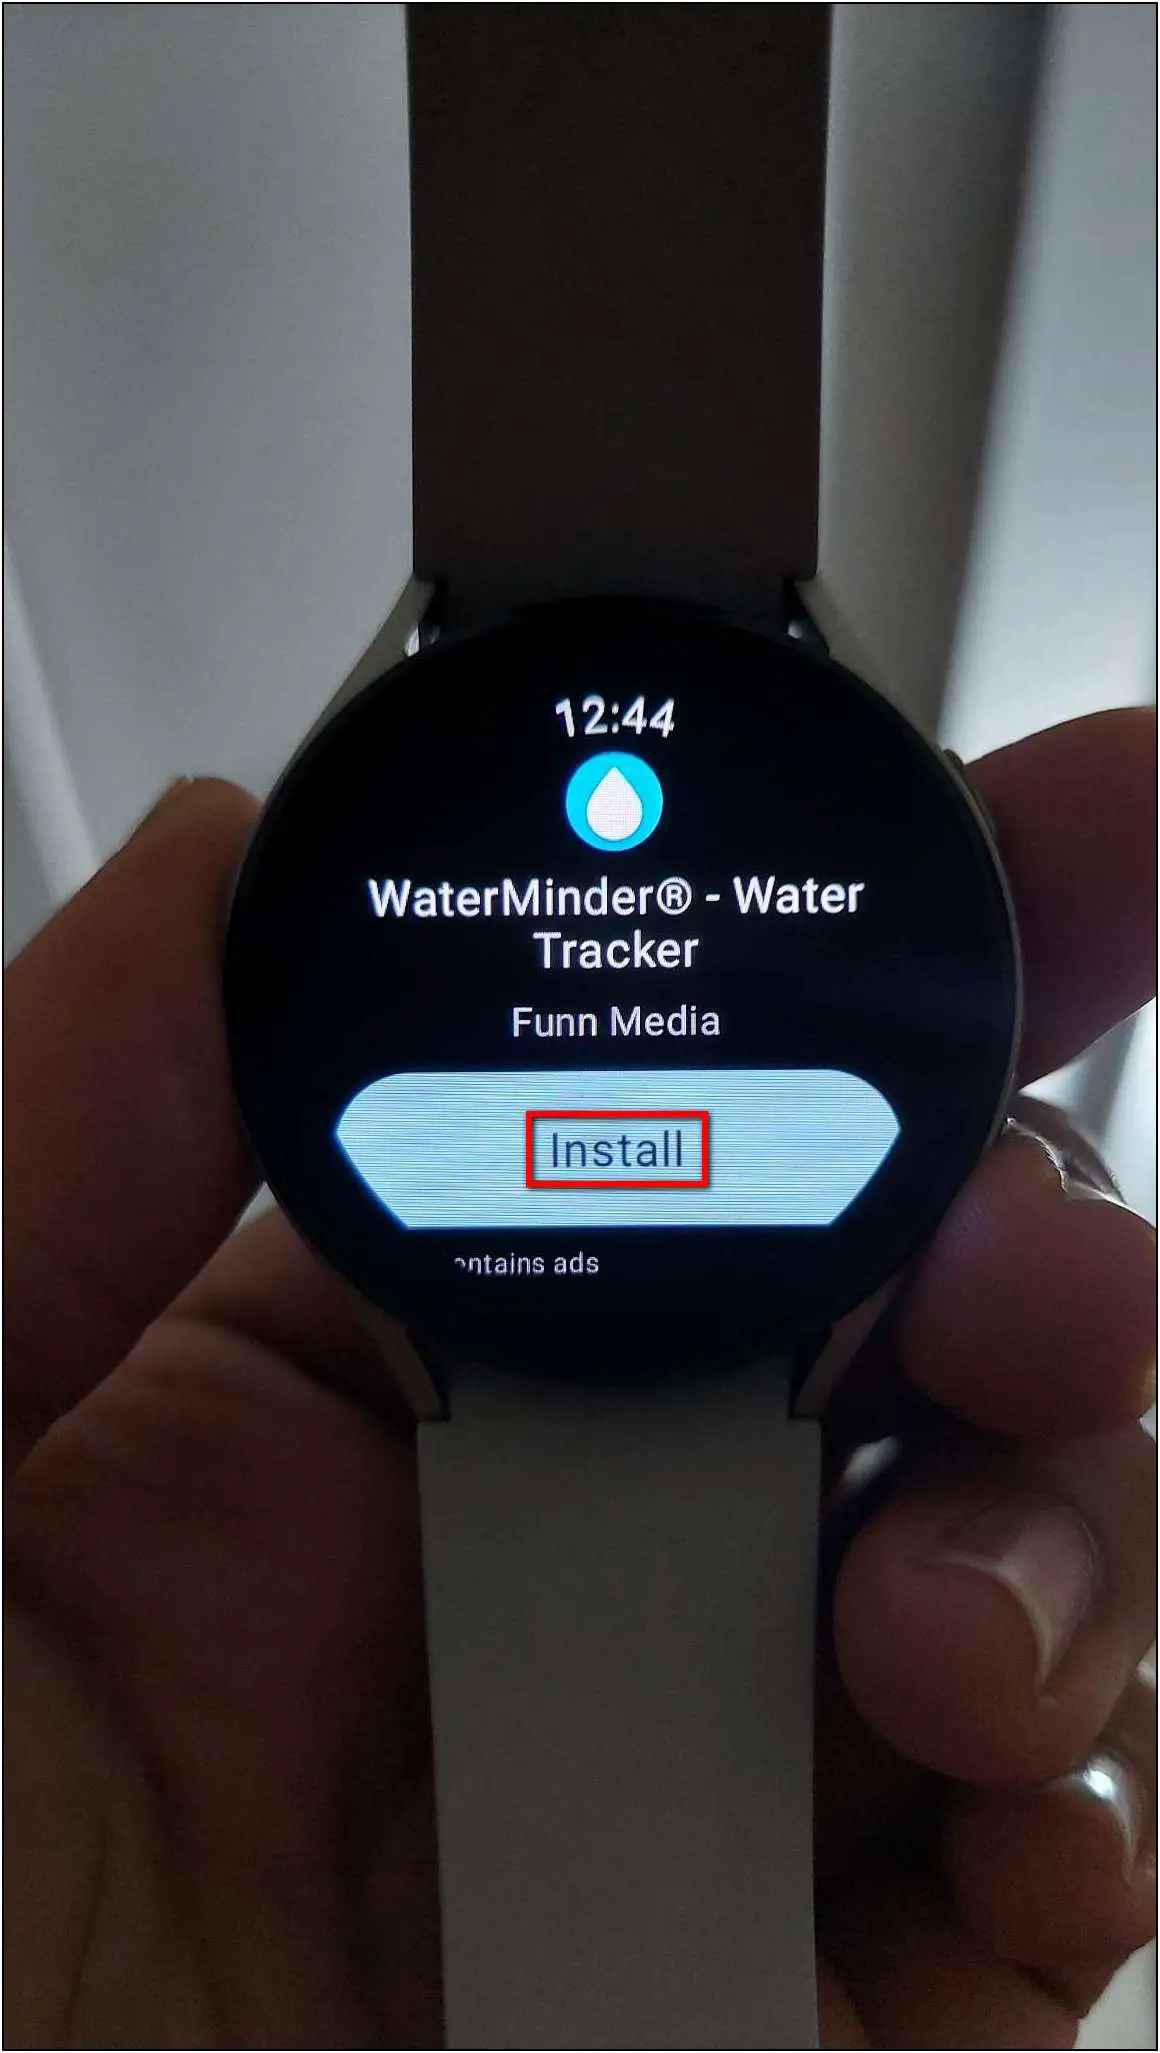 Drink Water Reminders Galaxy Watch 4